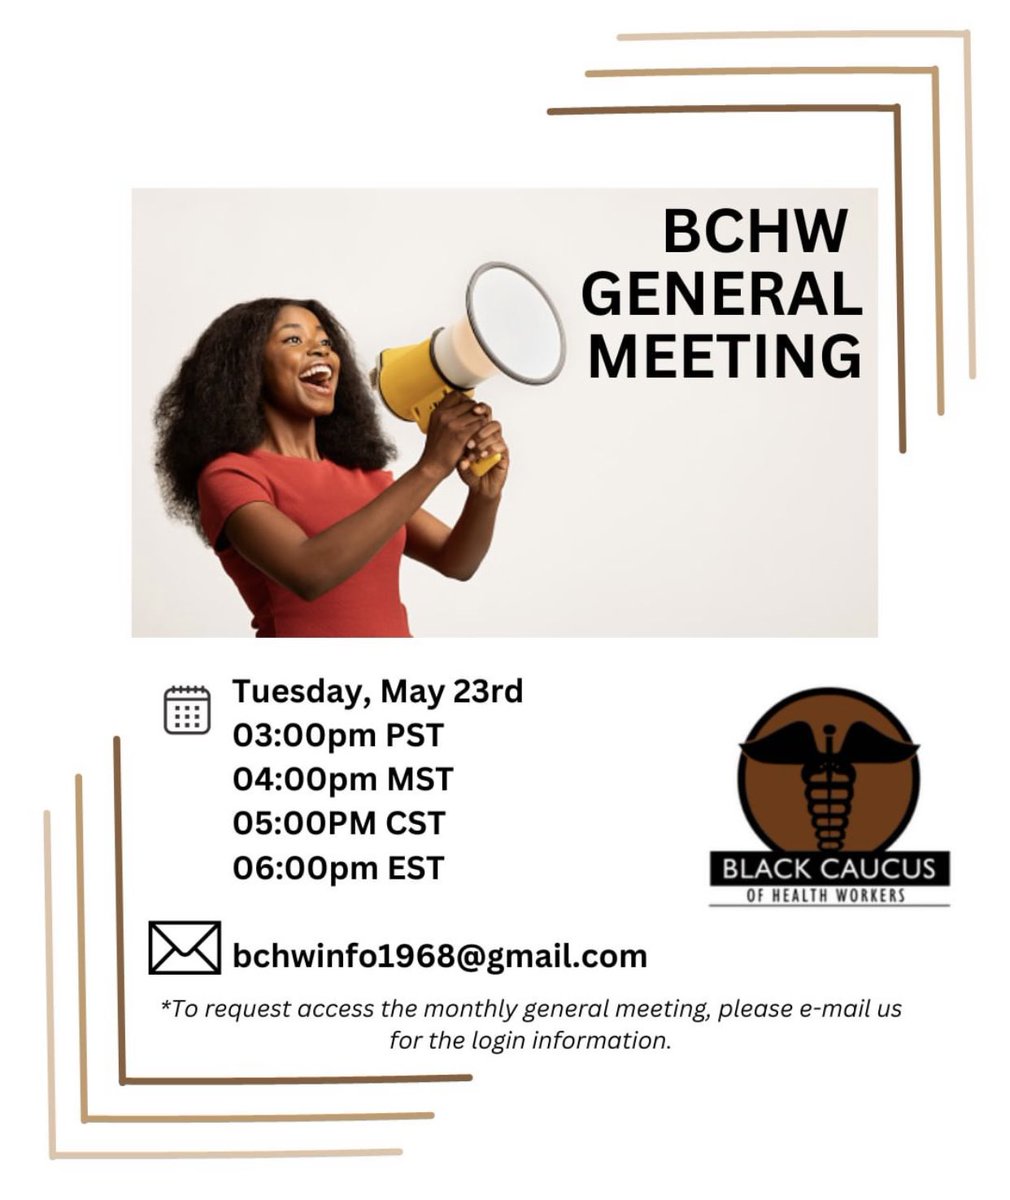 Be sure to join in on our monthly meeting today!